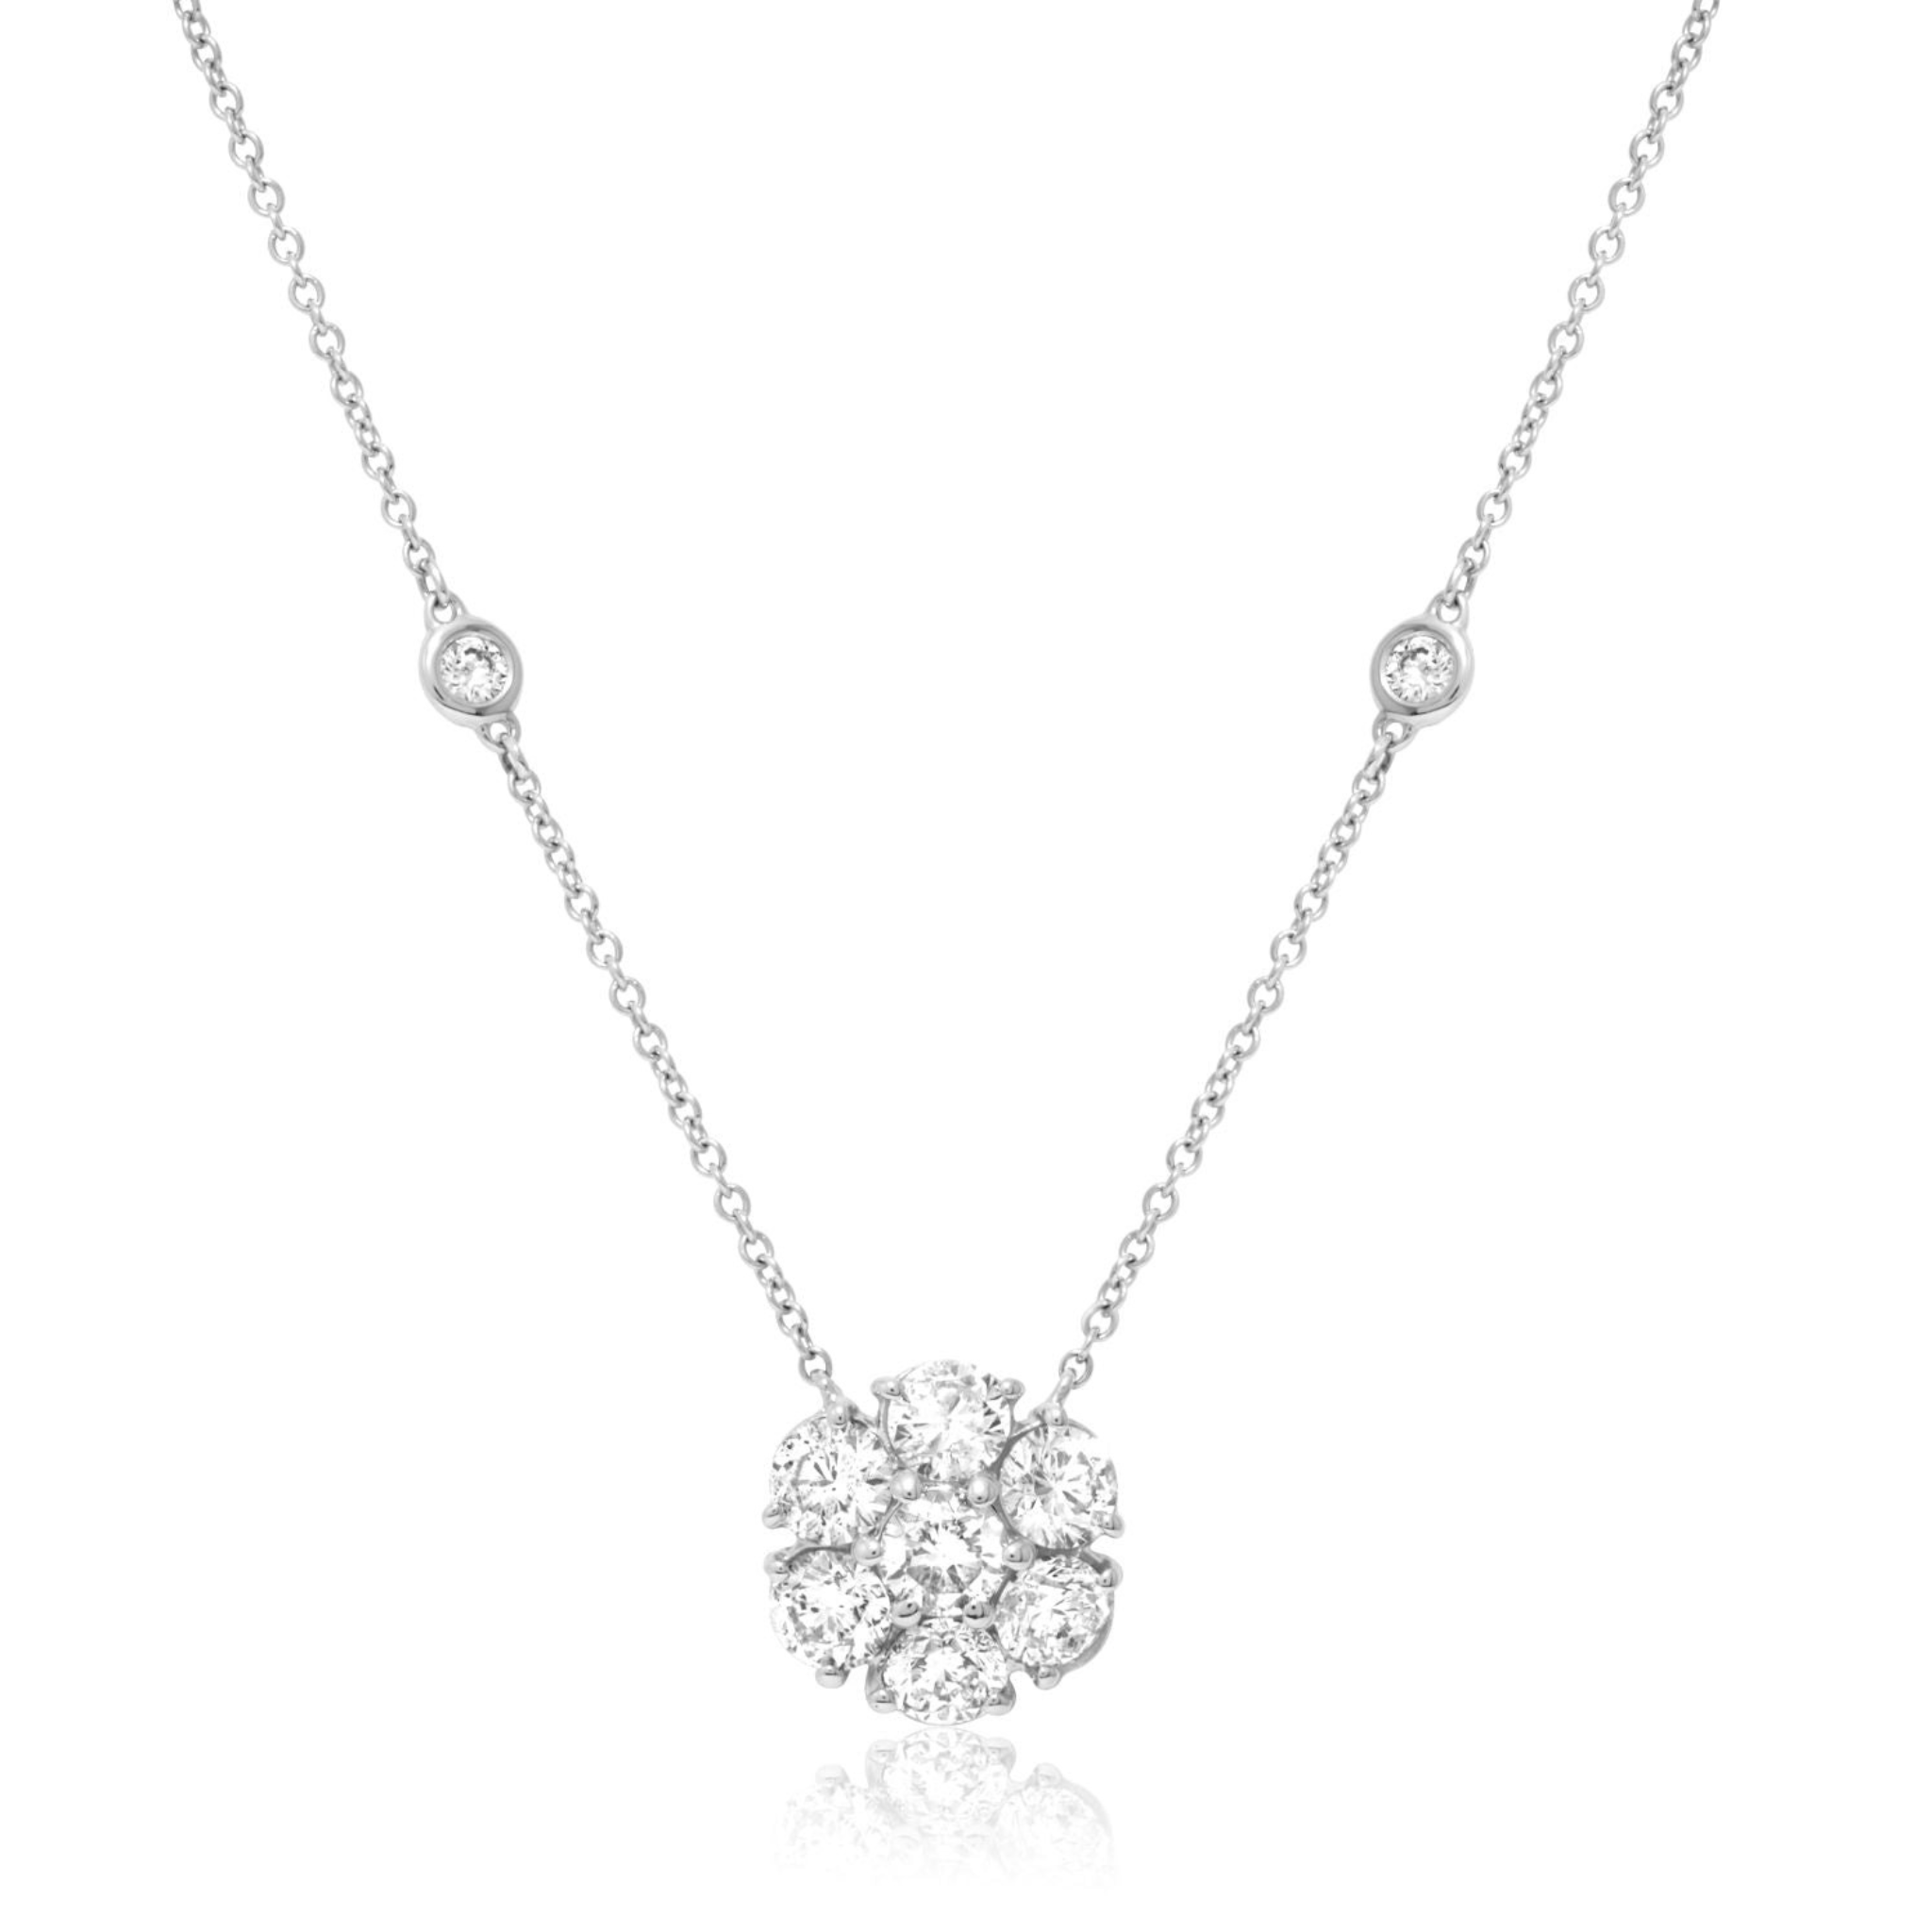 14kt White Gold Diamond Flower Cluster Necklace with 0.35 Cts.jpg